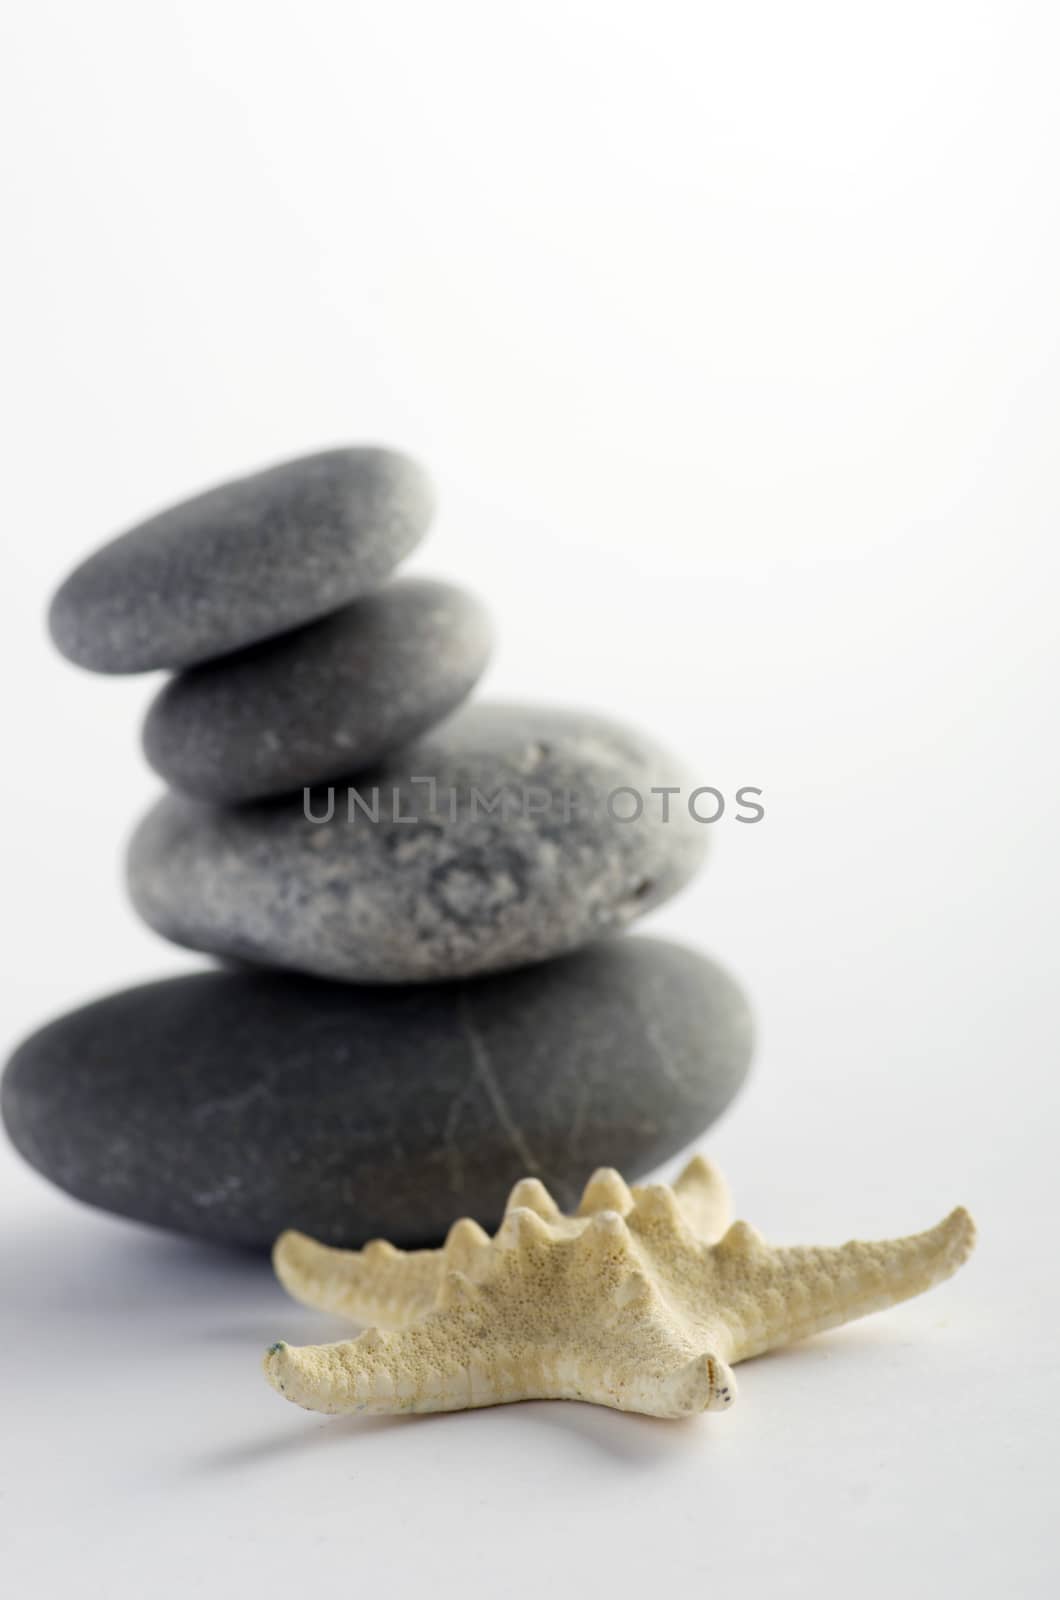 pile of stones and sea star closeup on white background